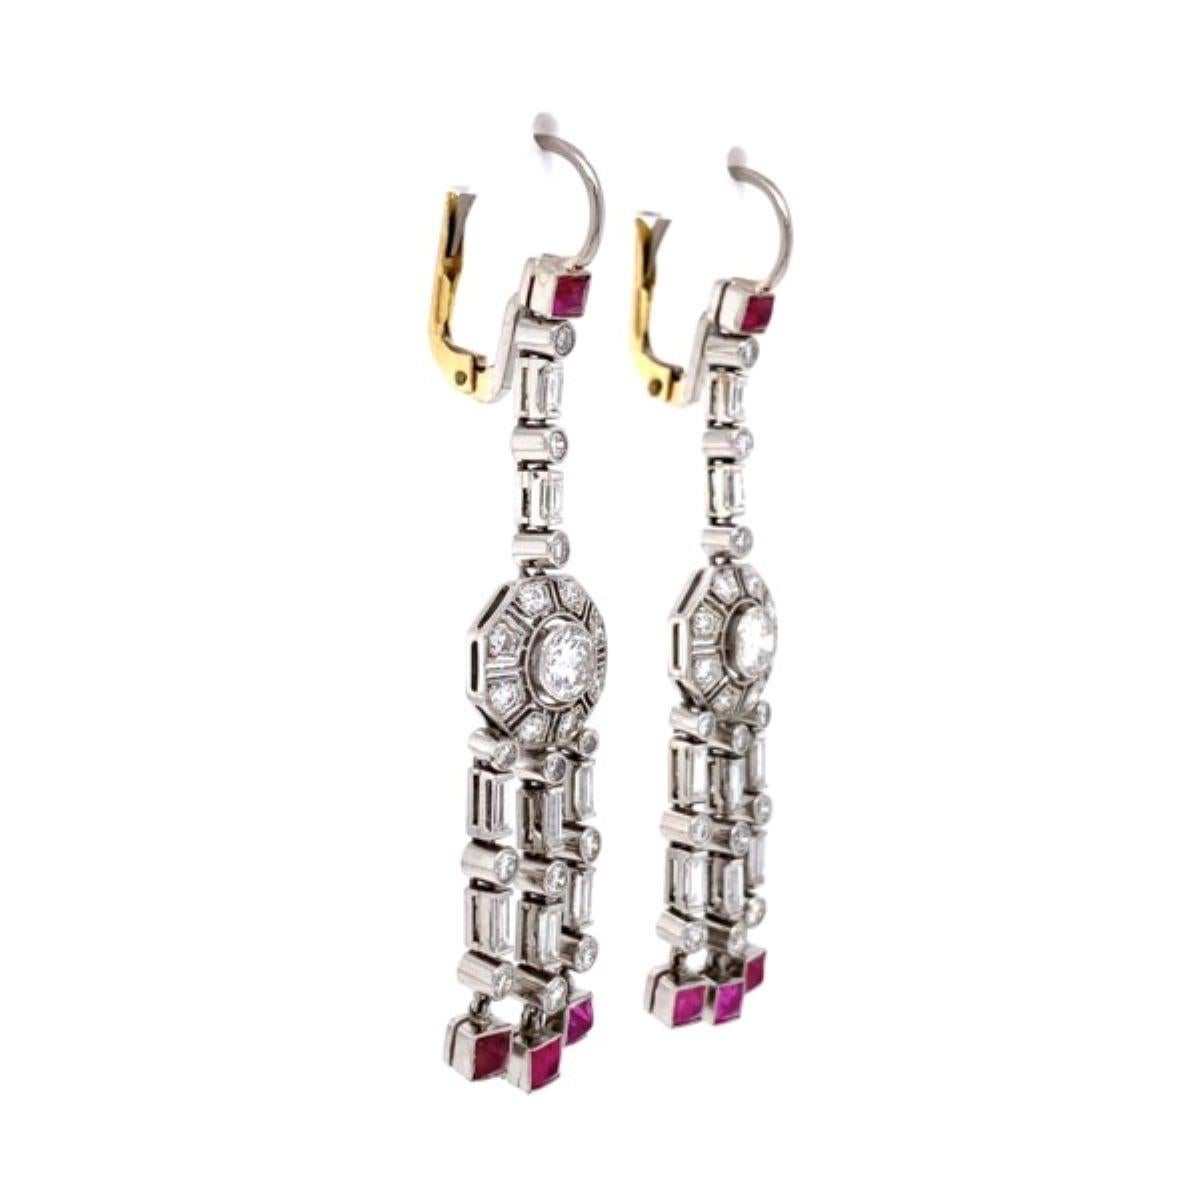 Stunning Diamond and Ruby Platinum Drop Dangle Earrings. Hand set with 8 buff top Rubies approx. 1.20tcw with alternating 16 baguette Diamonds approx. 0.62tcw and 40 round Diamonds approx. 0.80tcw and 2 round Diamonds approx. 0.70tcw. Diamonds